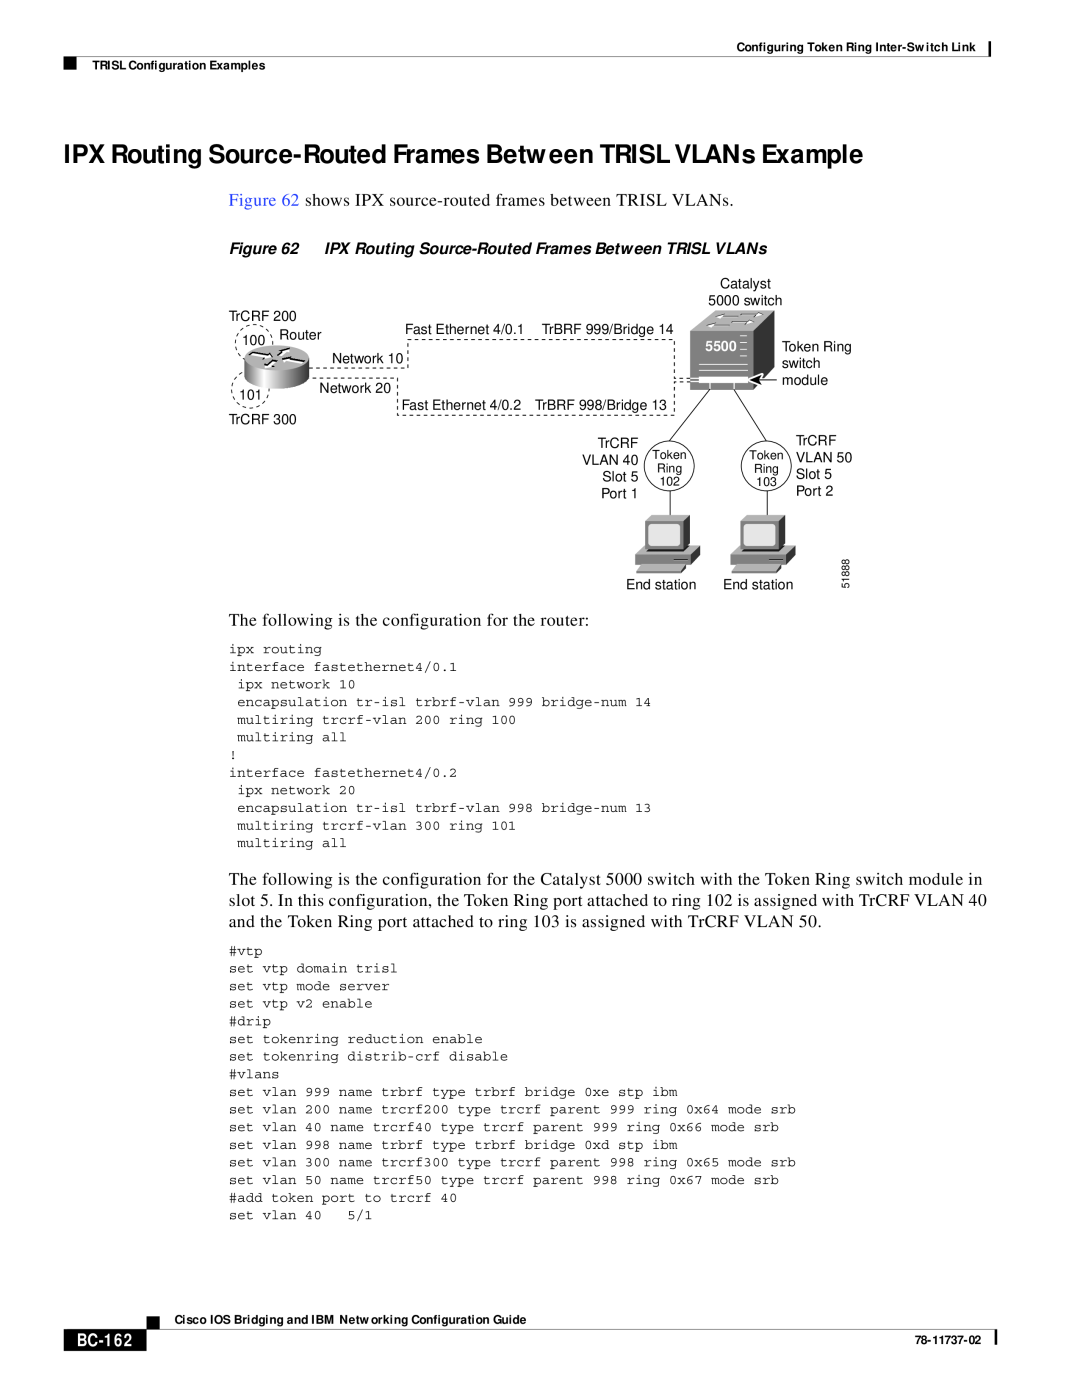 Cisco Systems BC-145 manual IPX Routing Source-Routed Frames Between TRISL VLANs Example, BC-162, 5500, 78-11737-02 